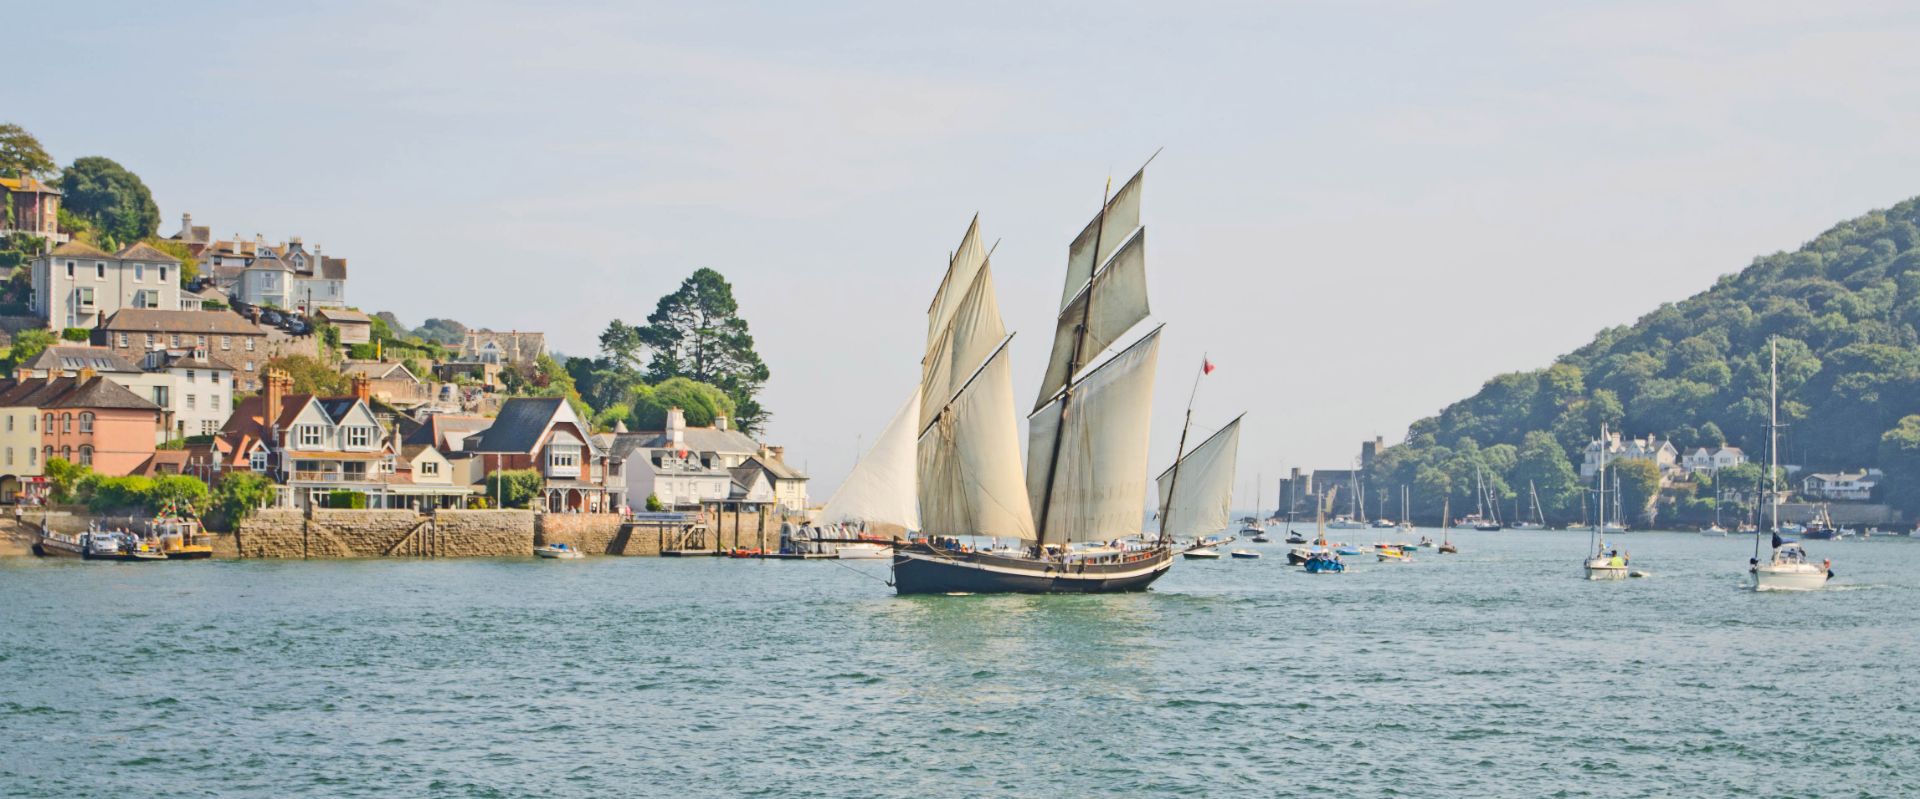 A sailing boat on the River Dart at Dartmouth and Kingswear